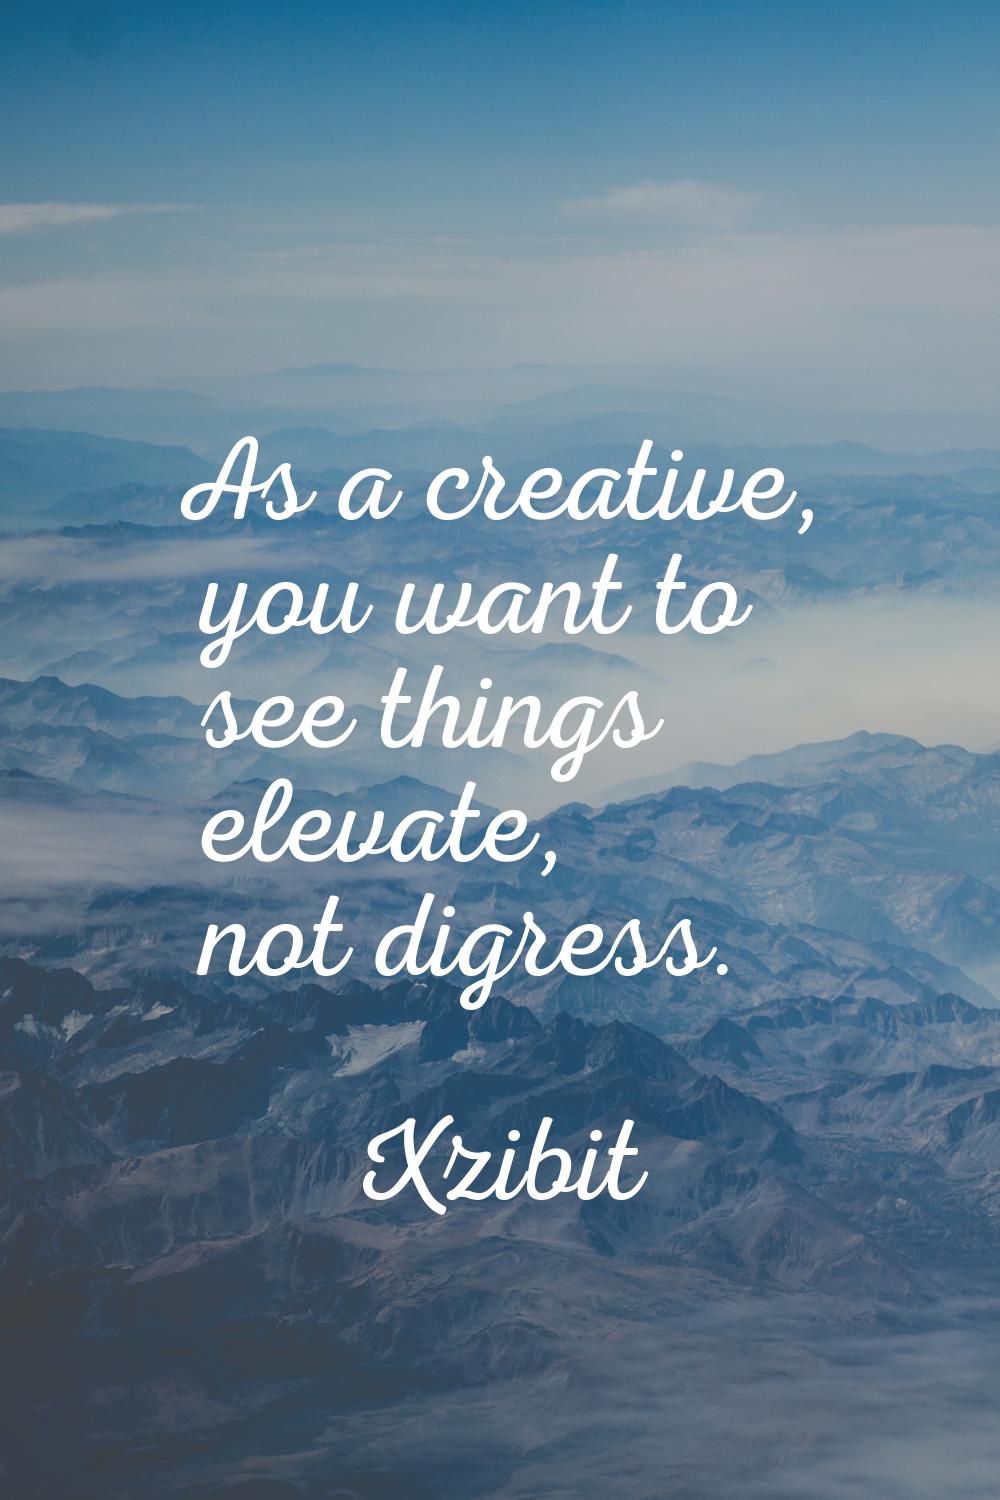 As a creative, you want to see things elevate, not digress.